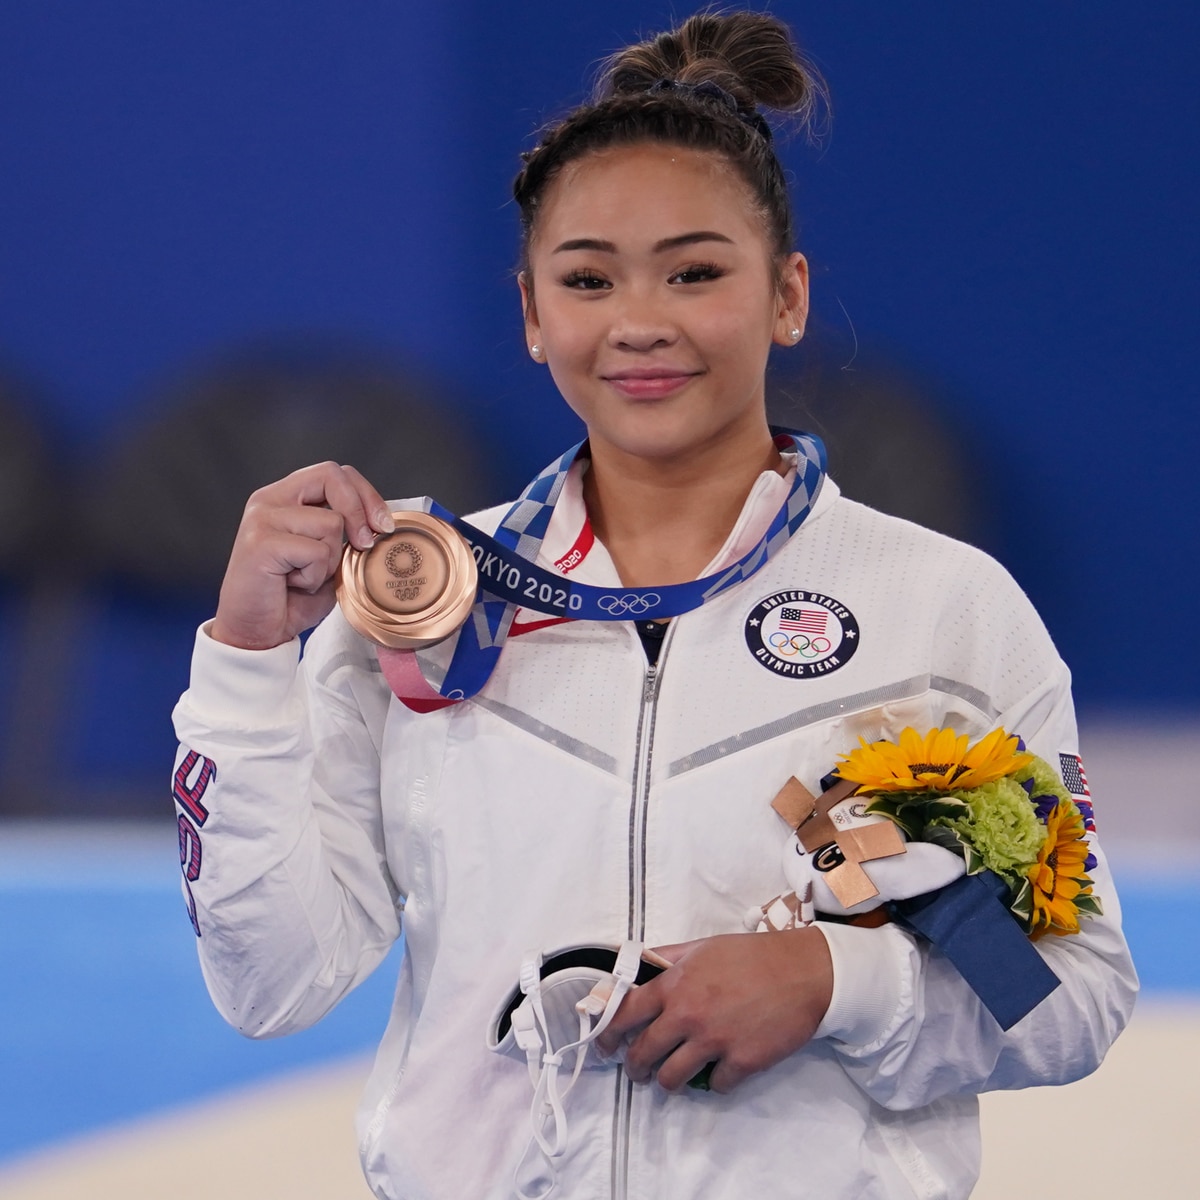 Sunisa Lee Comes Out of College After Winning Tokyo Olympics lineupmag